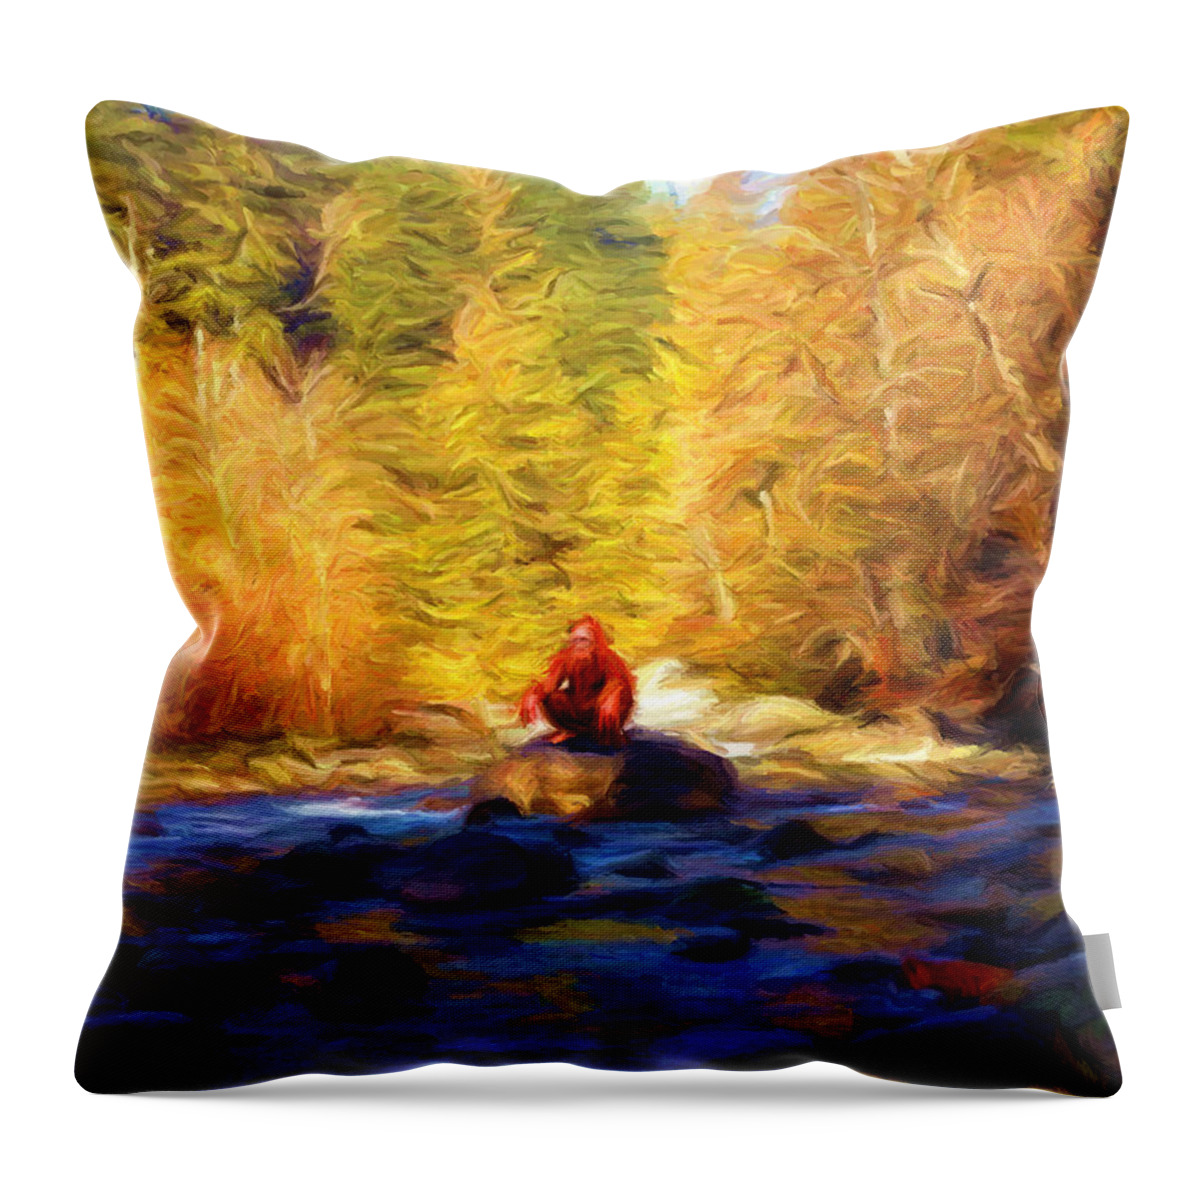 Big Foot Throw Pillow featuring the digital art Harry's Bath by Caito Junqueira